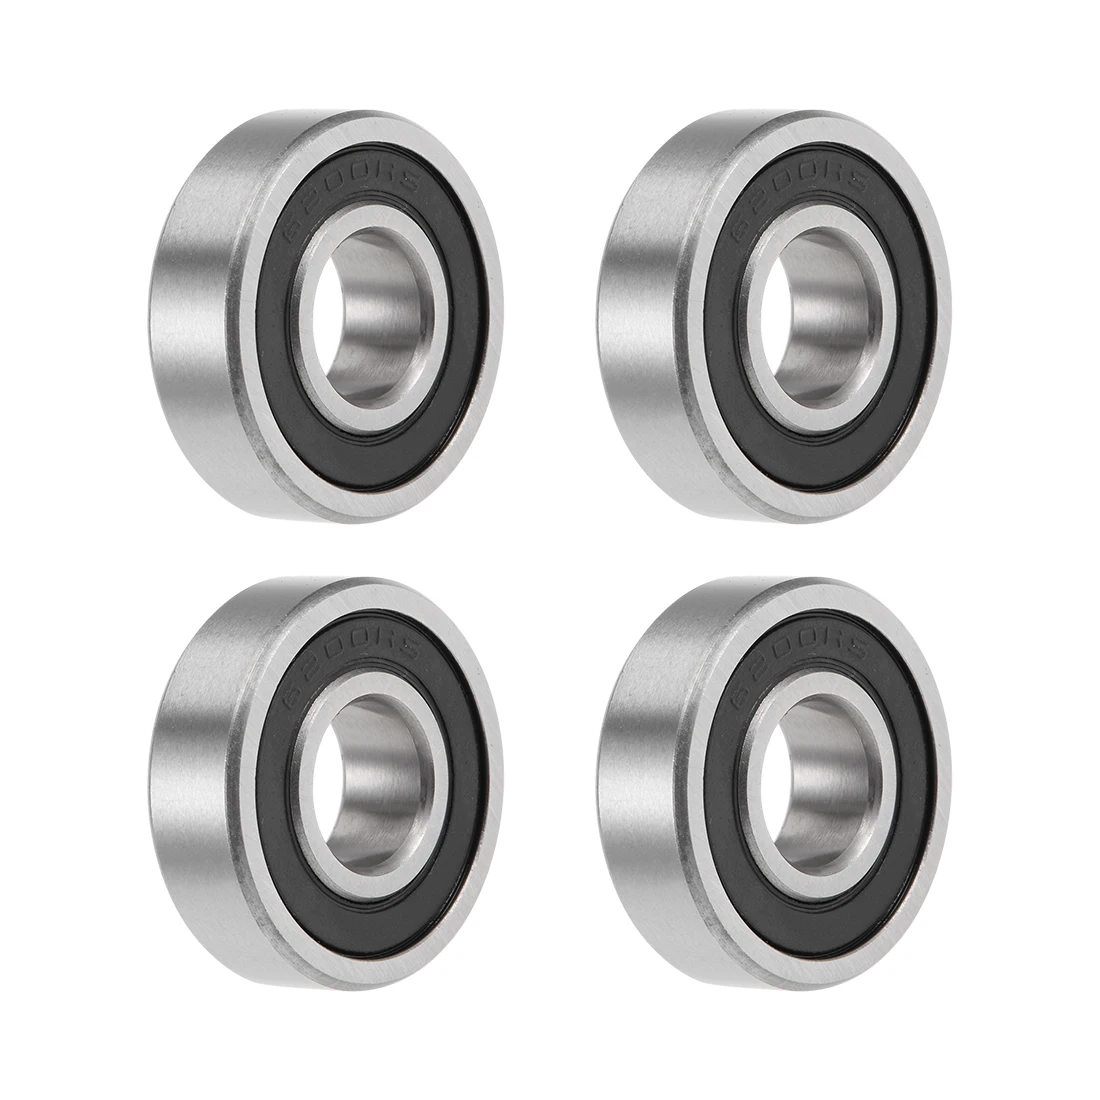 4pcs 6200/12-2RS Deep Groove Ball Bearings 12mm x 30mm x 9mm Double Sealed Chrome Steel P0(ABEC1)